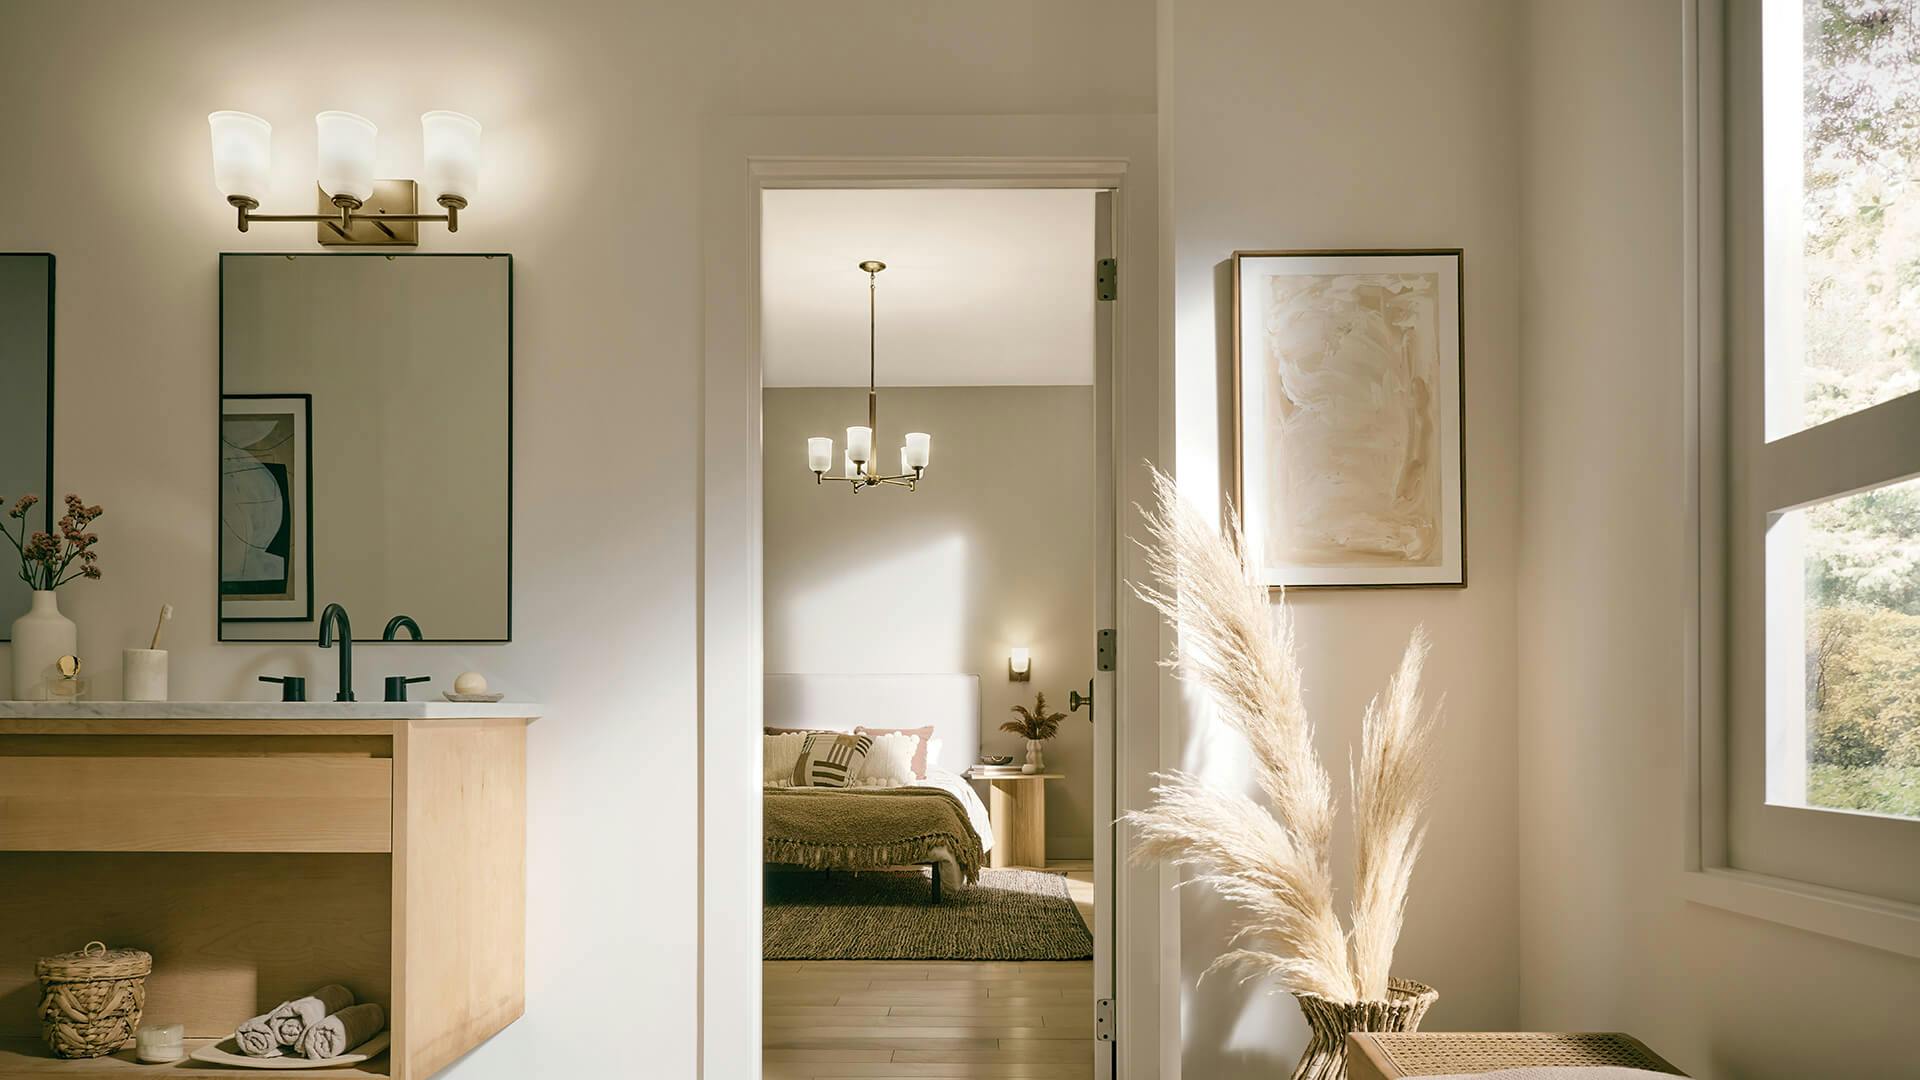 Bathroom looking into a doorway to a bedroom, warm cream and tan accents throughout featuring Shailene wall sconce above the vanity and chandelier in bedroom